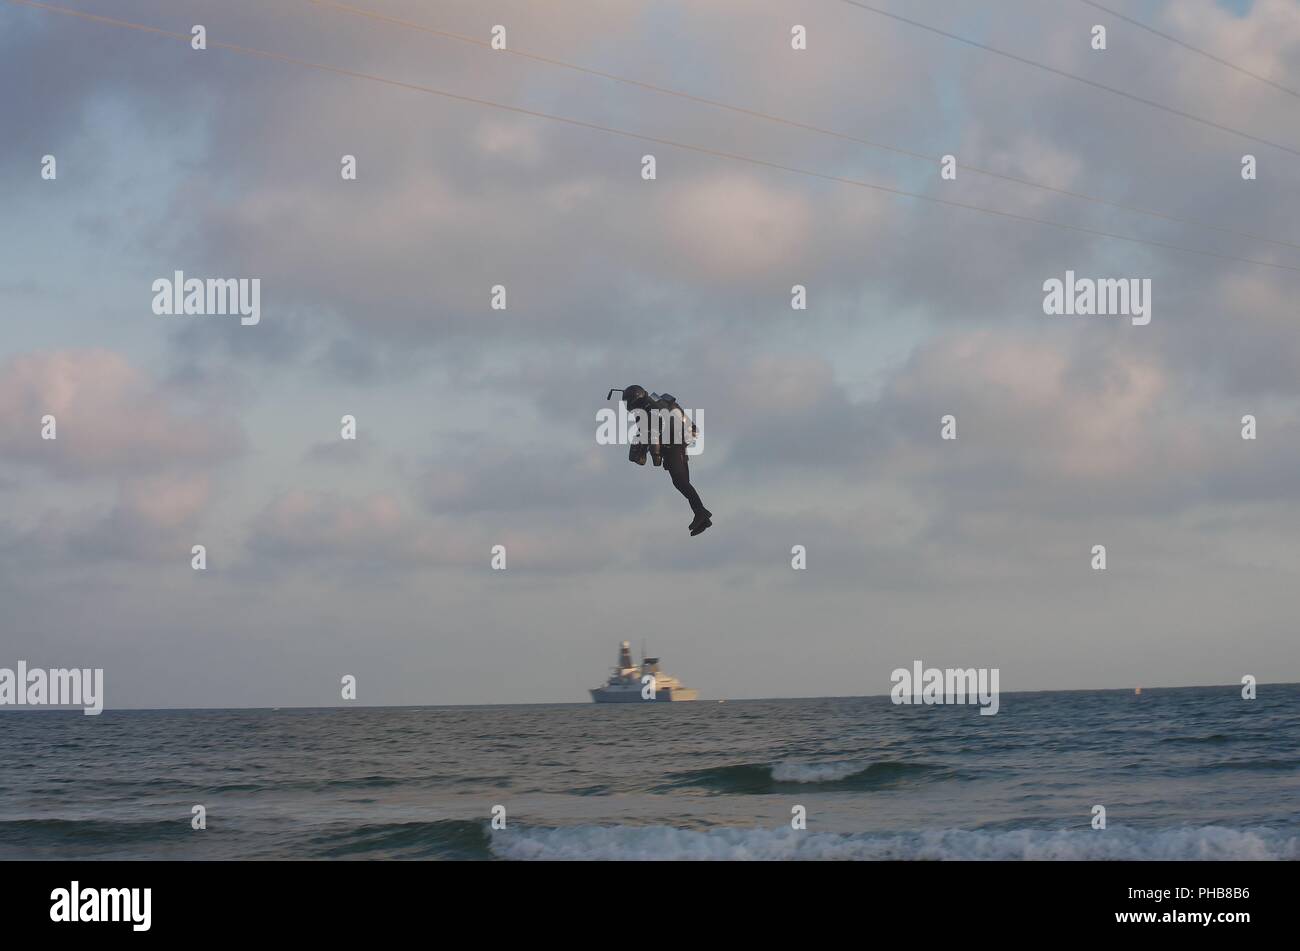 Gravity Jet Suit Team display at the Bournemouth Air festival August 31st 2018. Chief test pilot & founder Richard Browning with Dr Angelo N Grubisic fly from Bournemouth Pier. Stock Photo